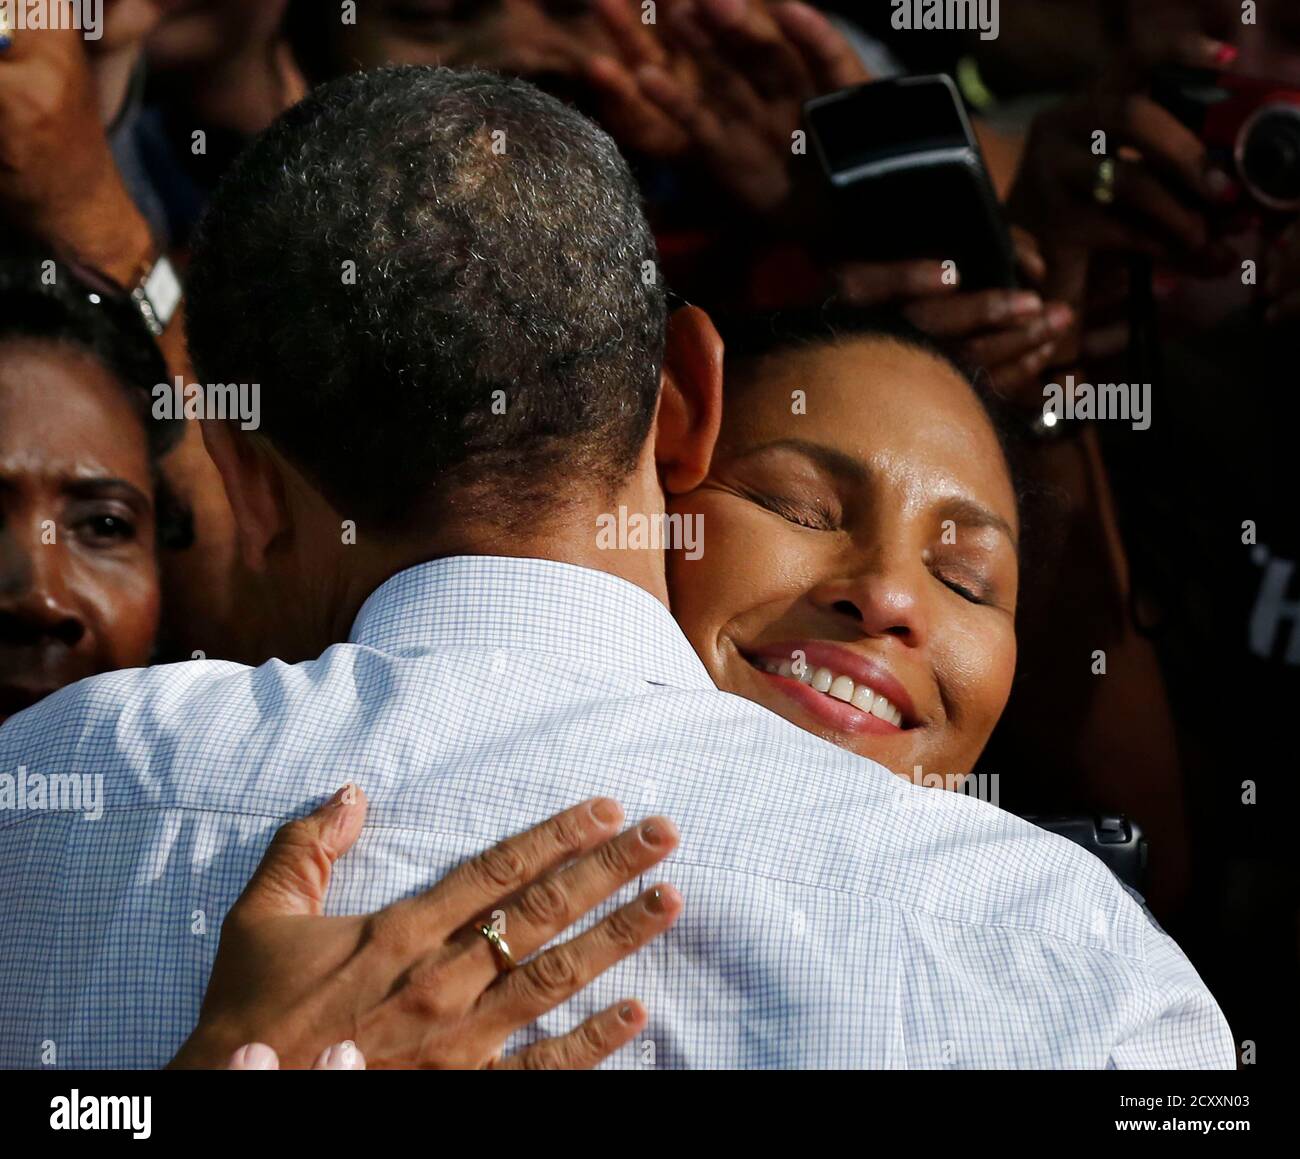 A woman hugs U.S. President Barack Obama at a campaign event at the Palm Beach County Convention Center in Florida September 9, 2012.    REUTERS/Larry Downing  (UNITED STATES - Tags: POLITICS ELECTIONS) Stock Photo